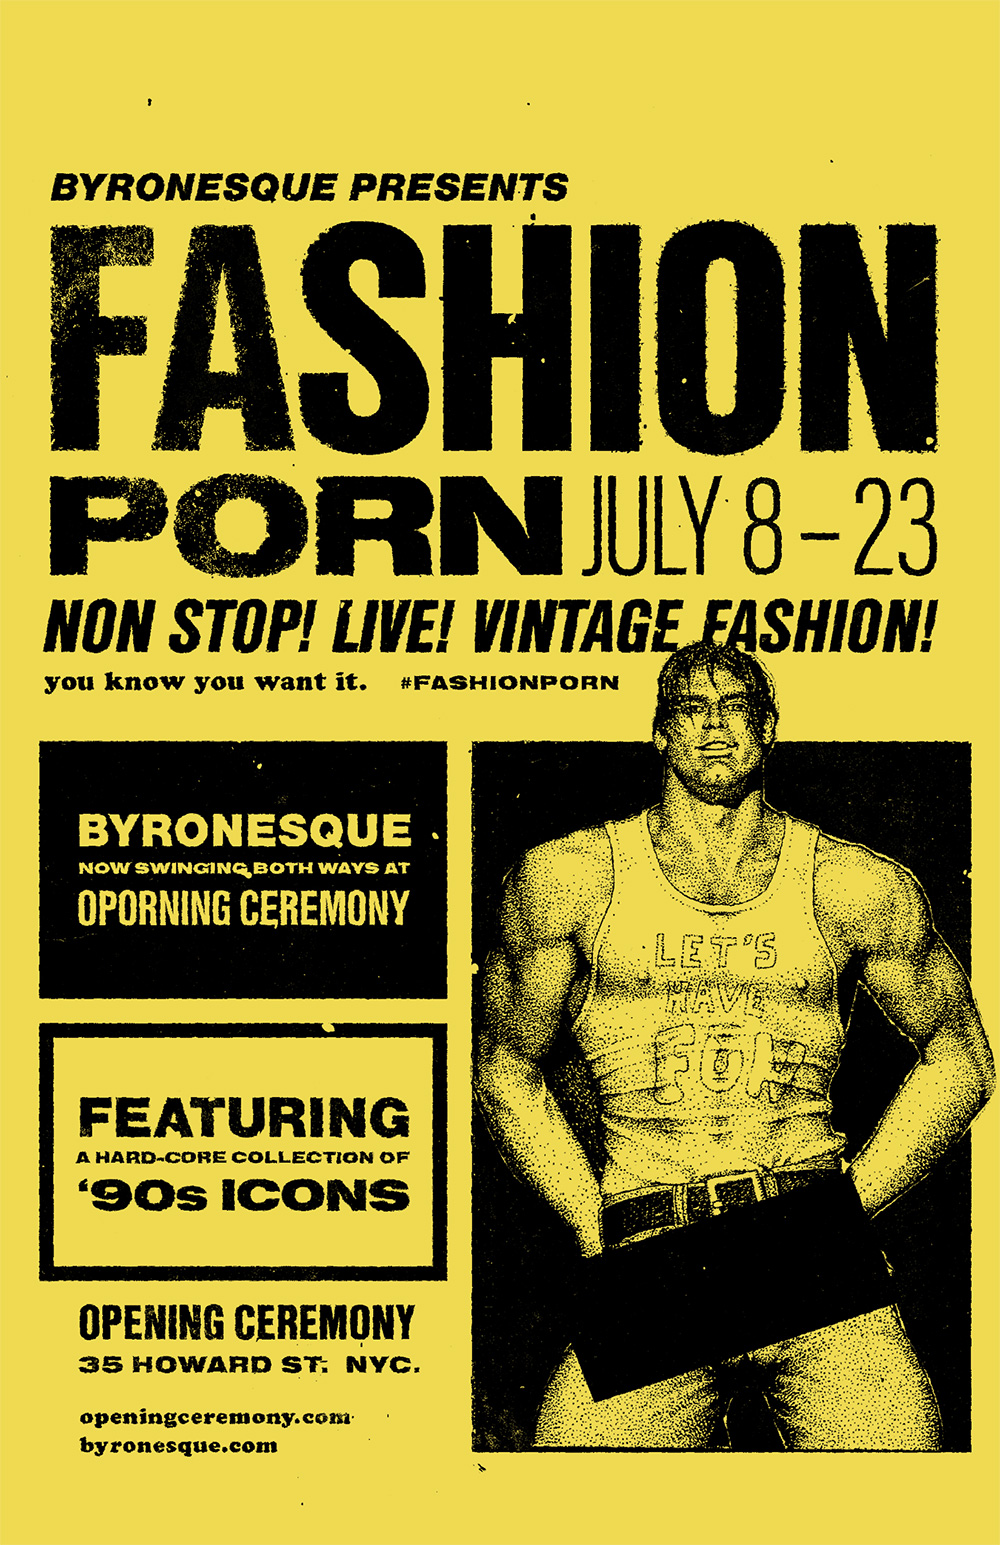 90s Porn Posters - Opening Ceremony Is Having a '90s Fashion Porn Pop-Up Event ...